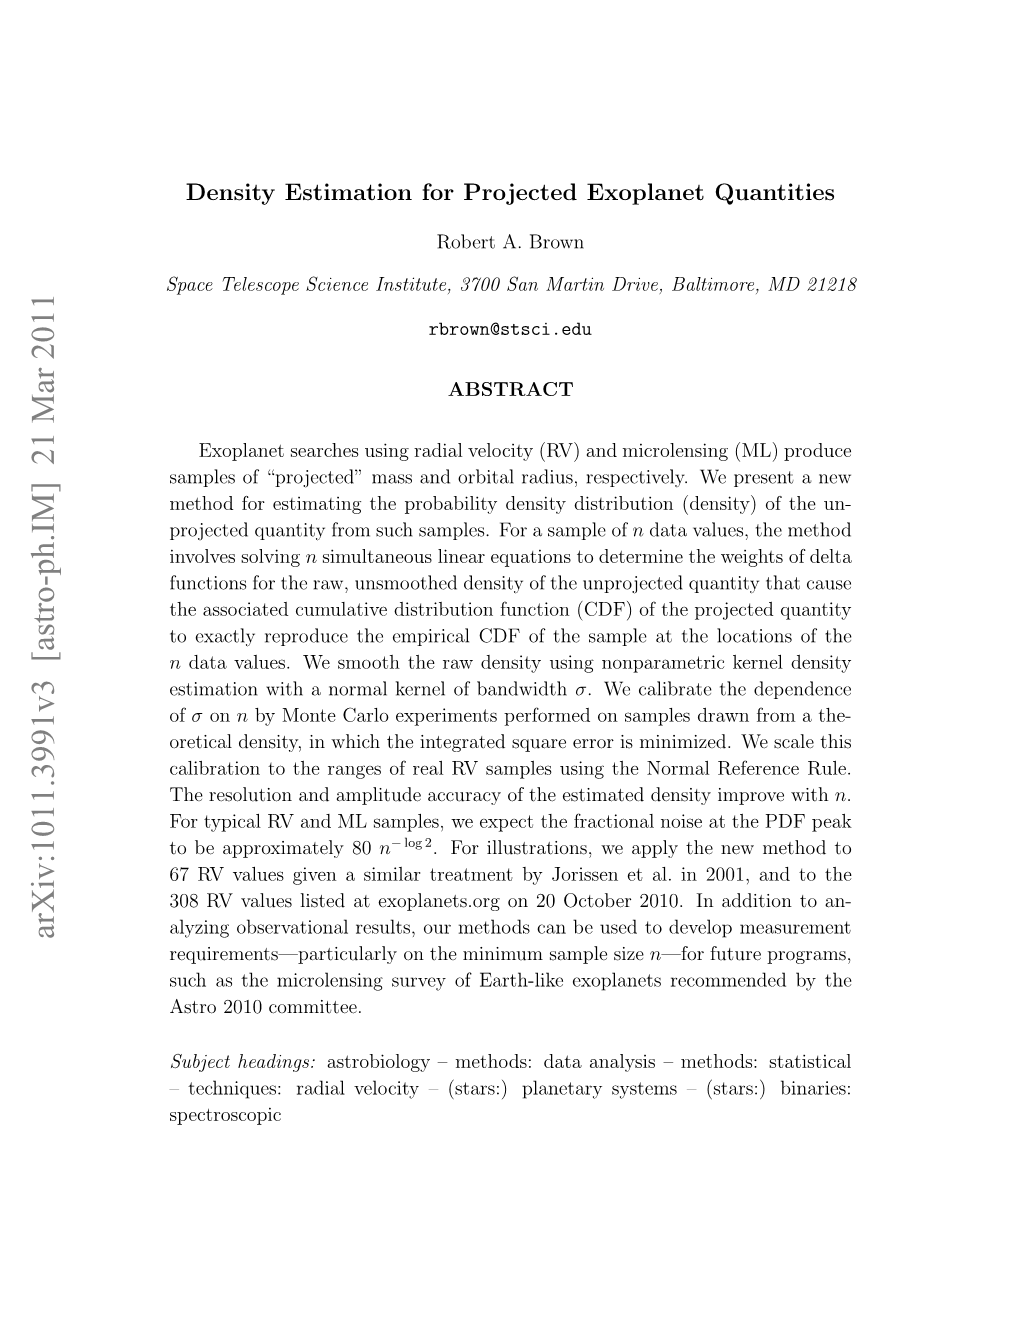 Density Estimation for Projected Exoplanet Quantities